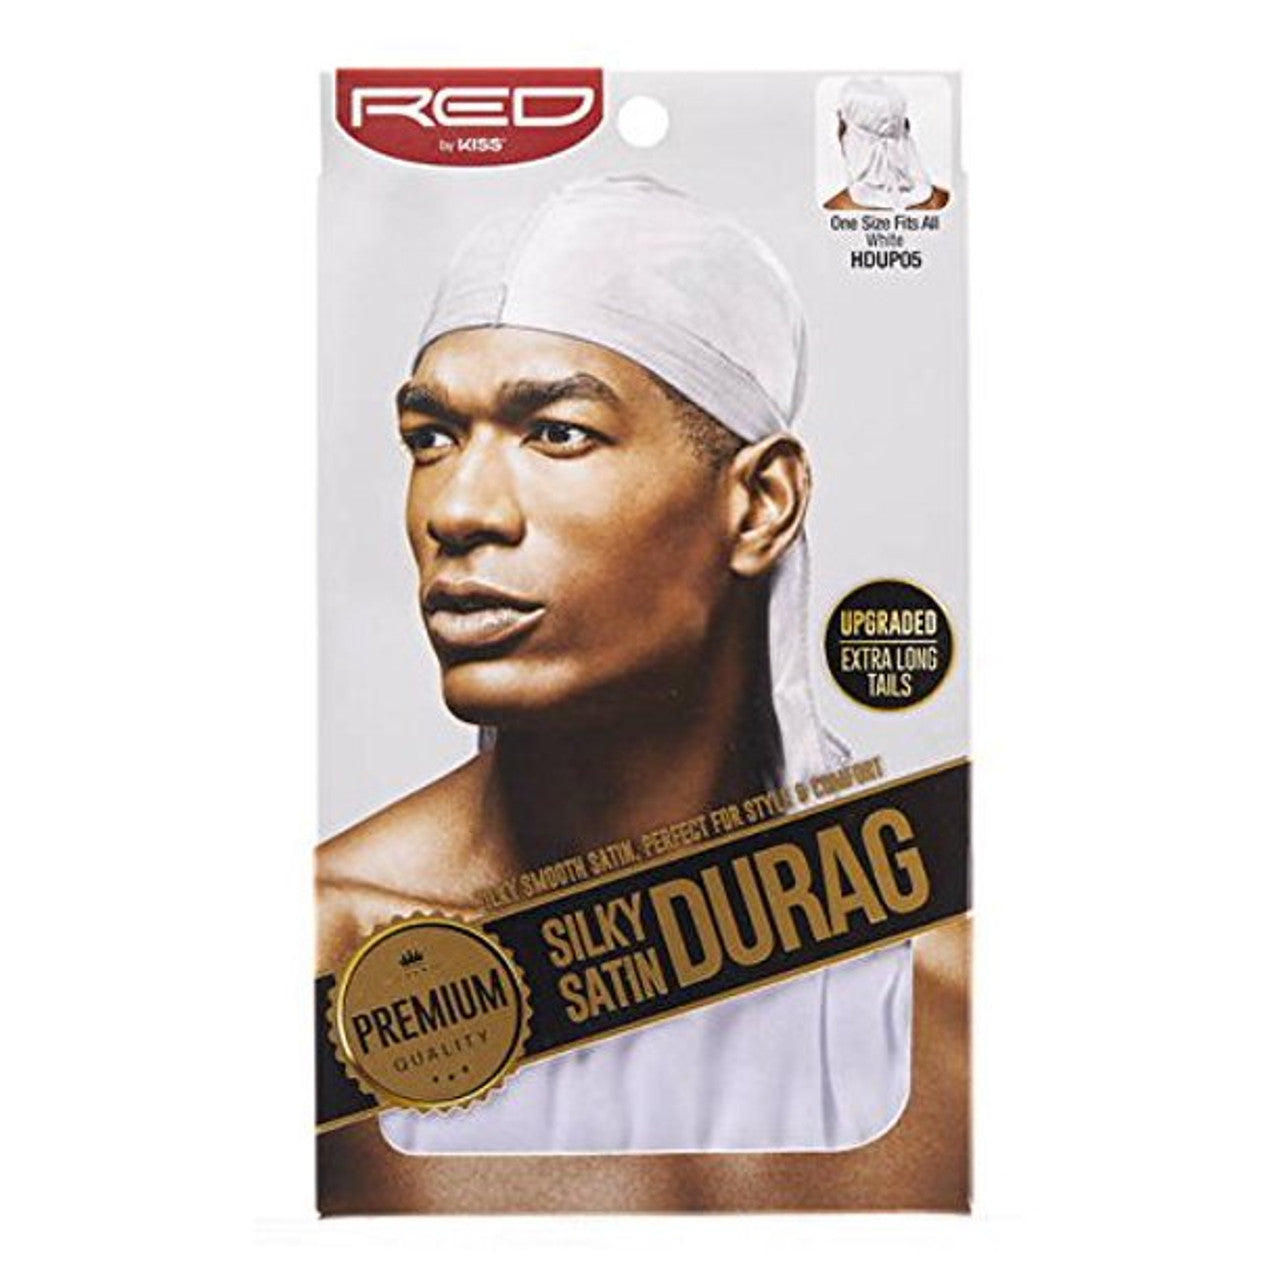 Red by Kiss Silky Satin Durag - White - #HDUP05